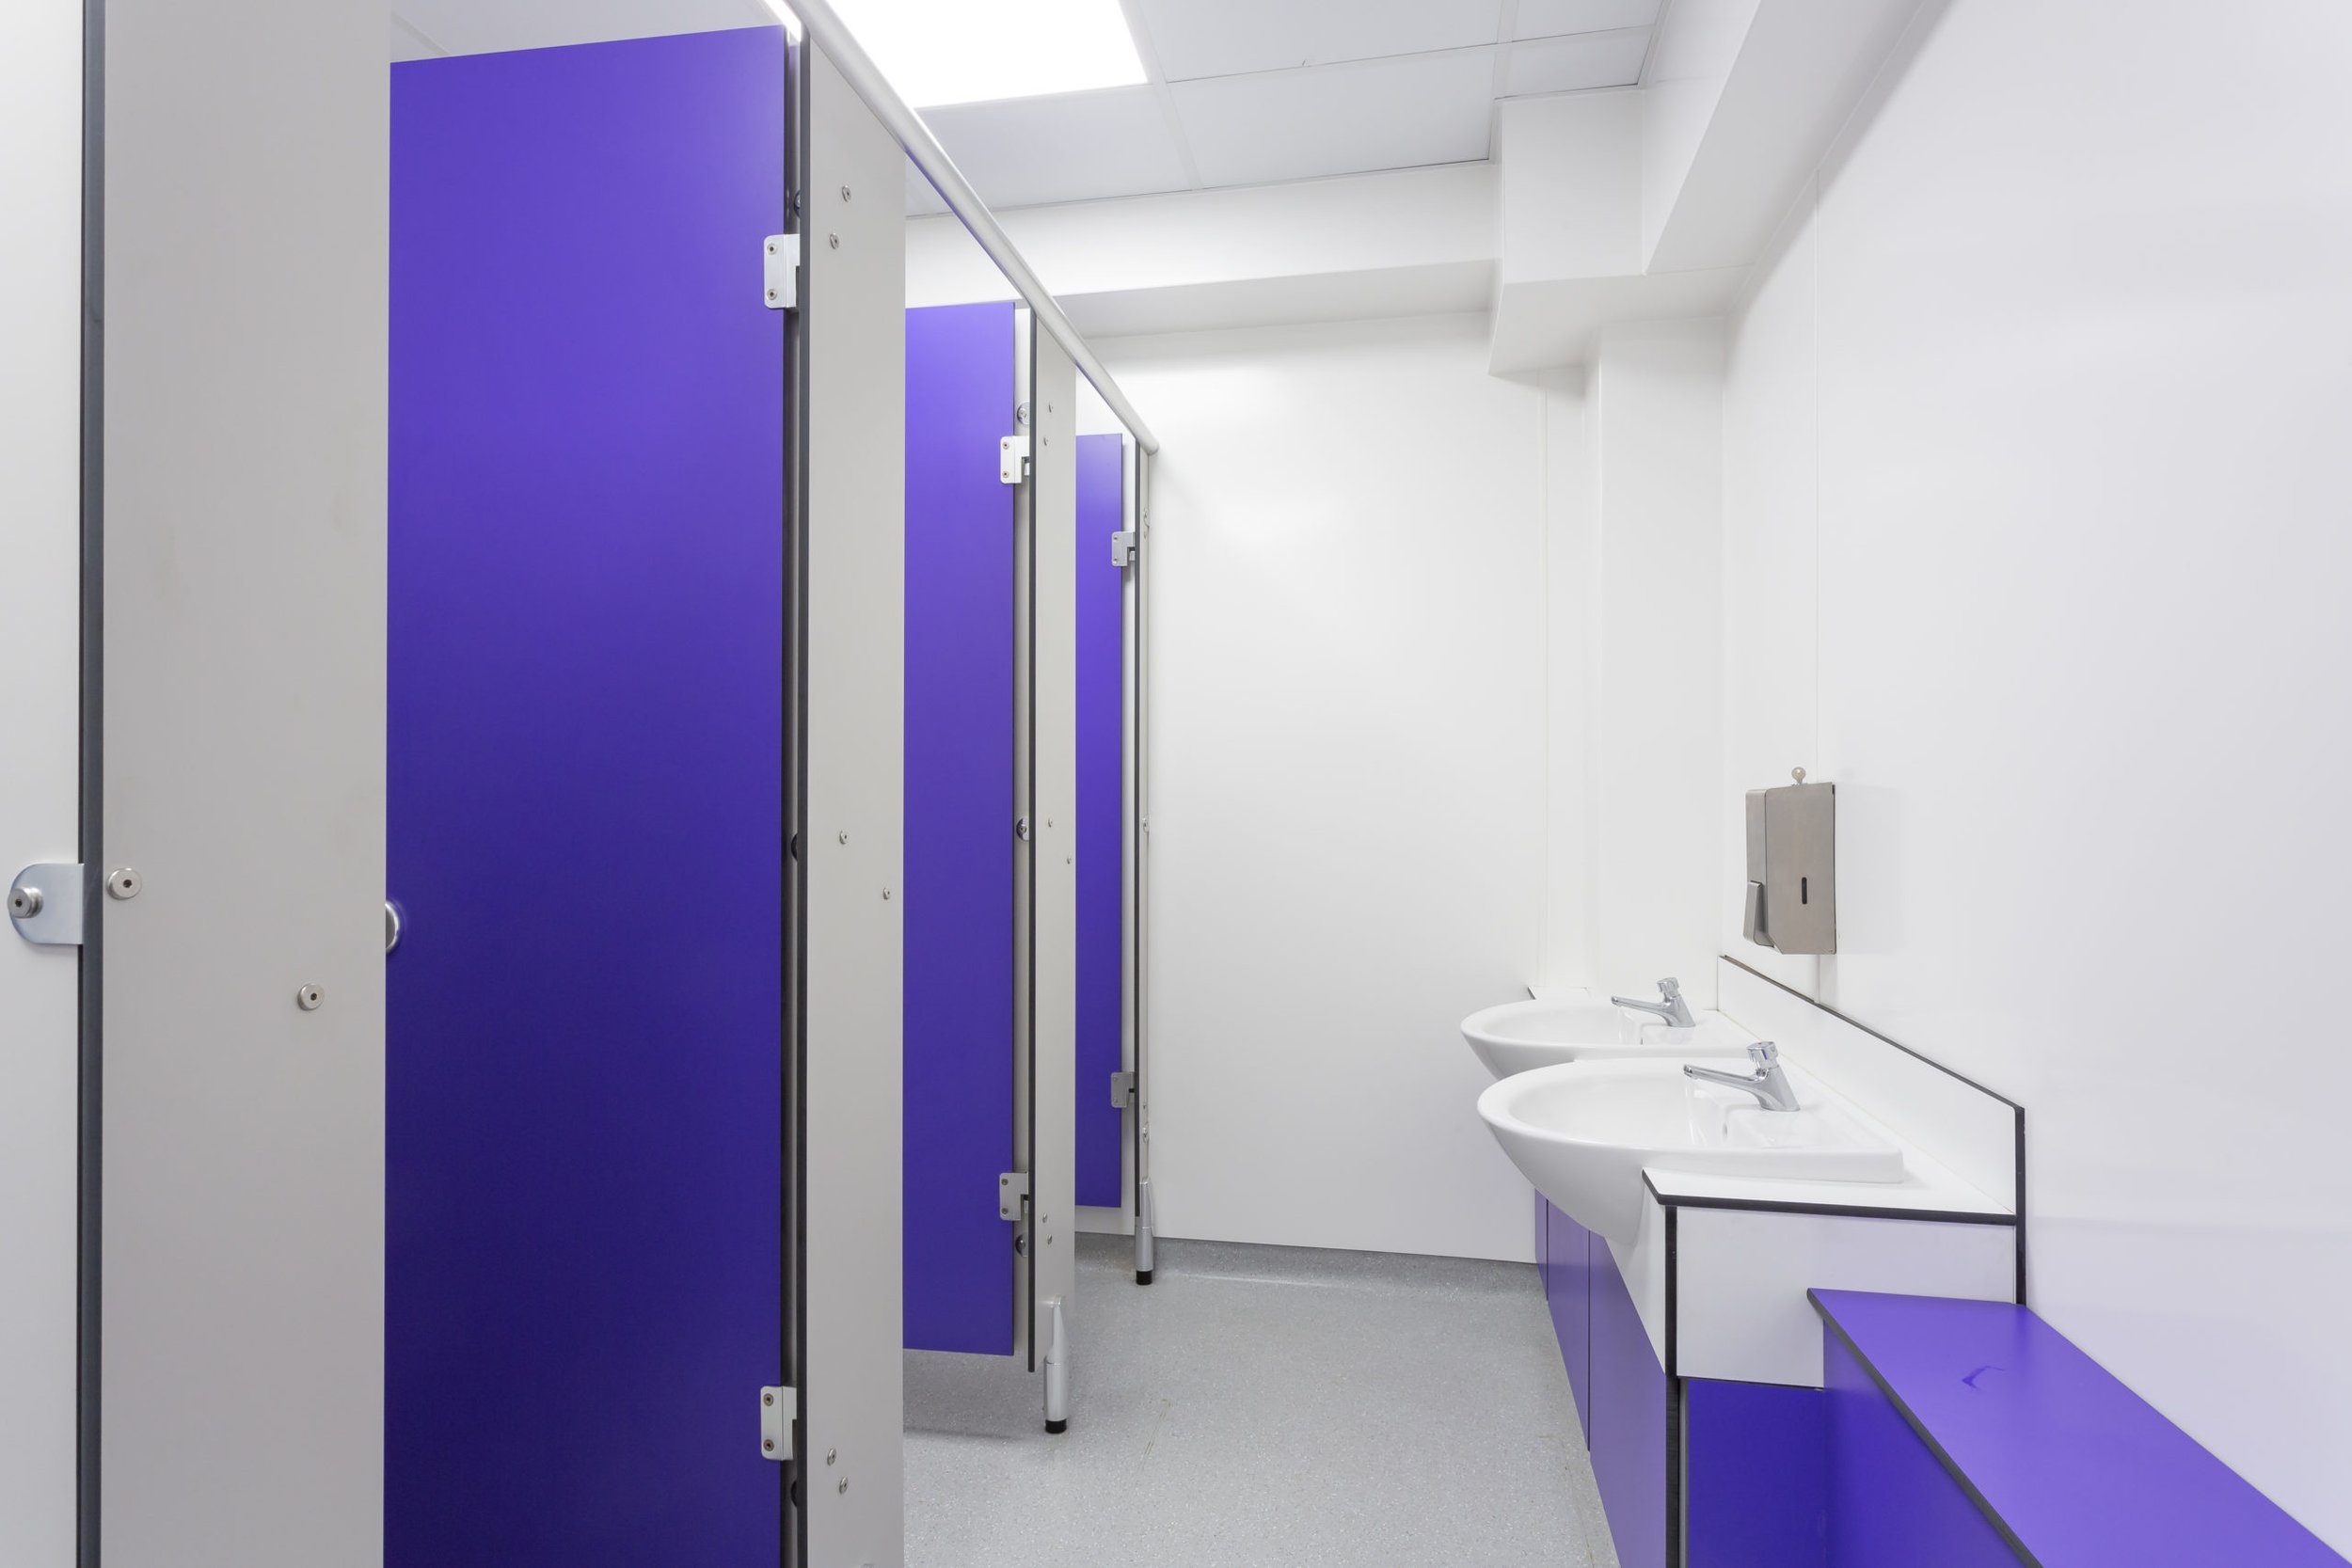 Purple and white toilets and vanity unit at cliff park school.jpg